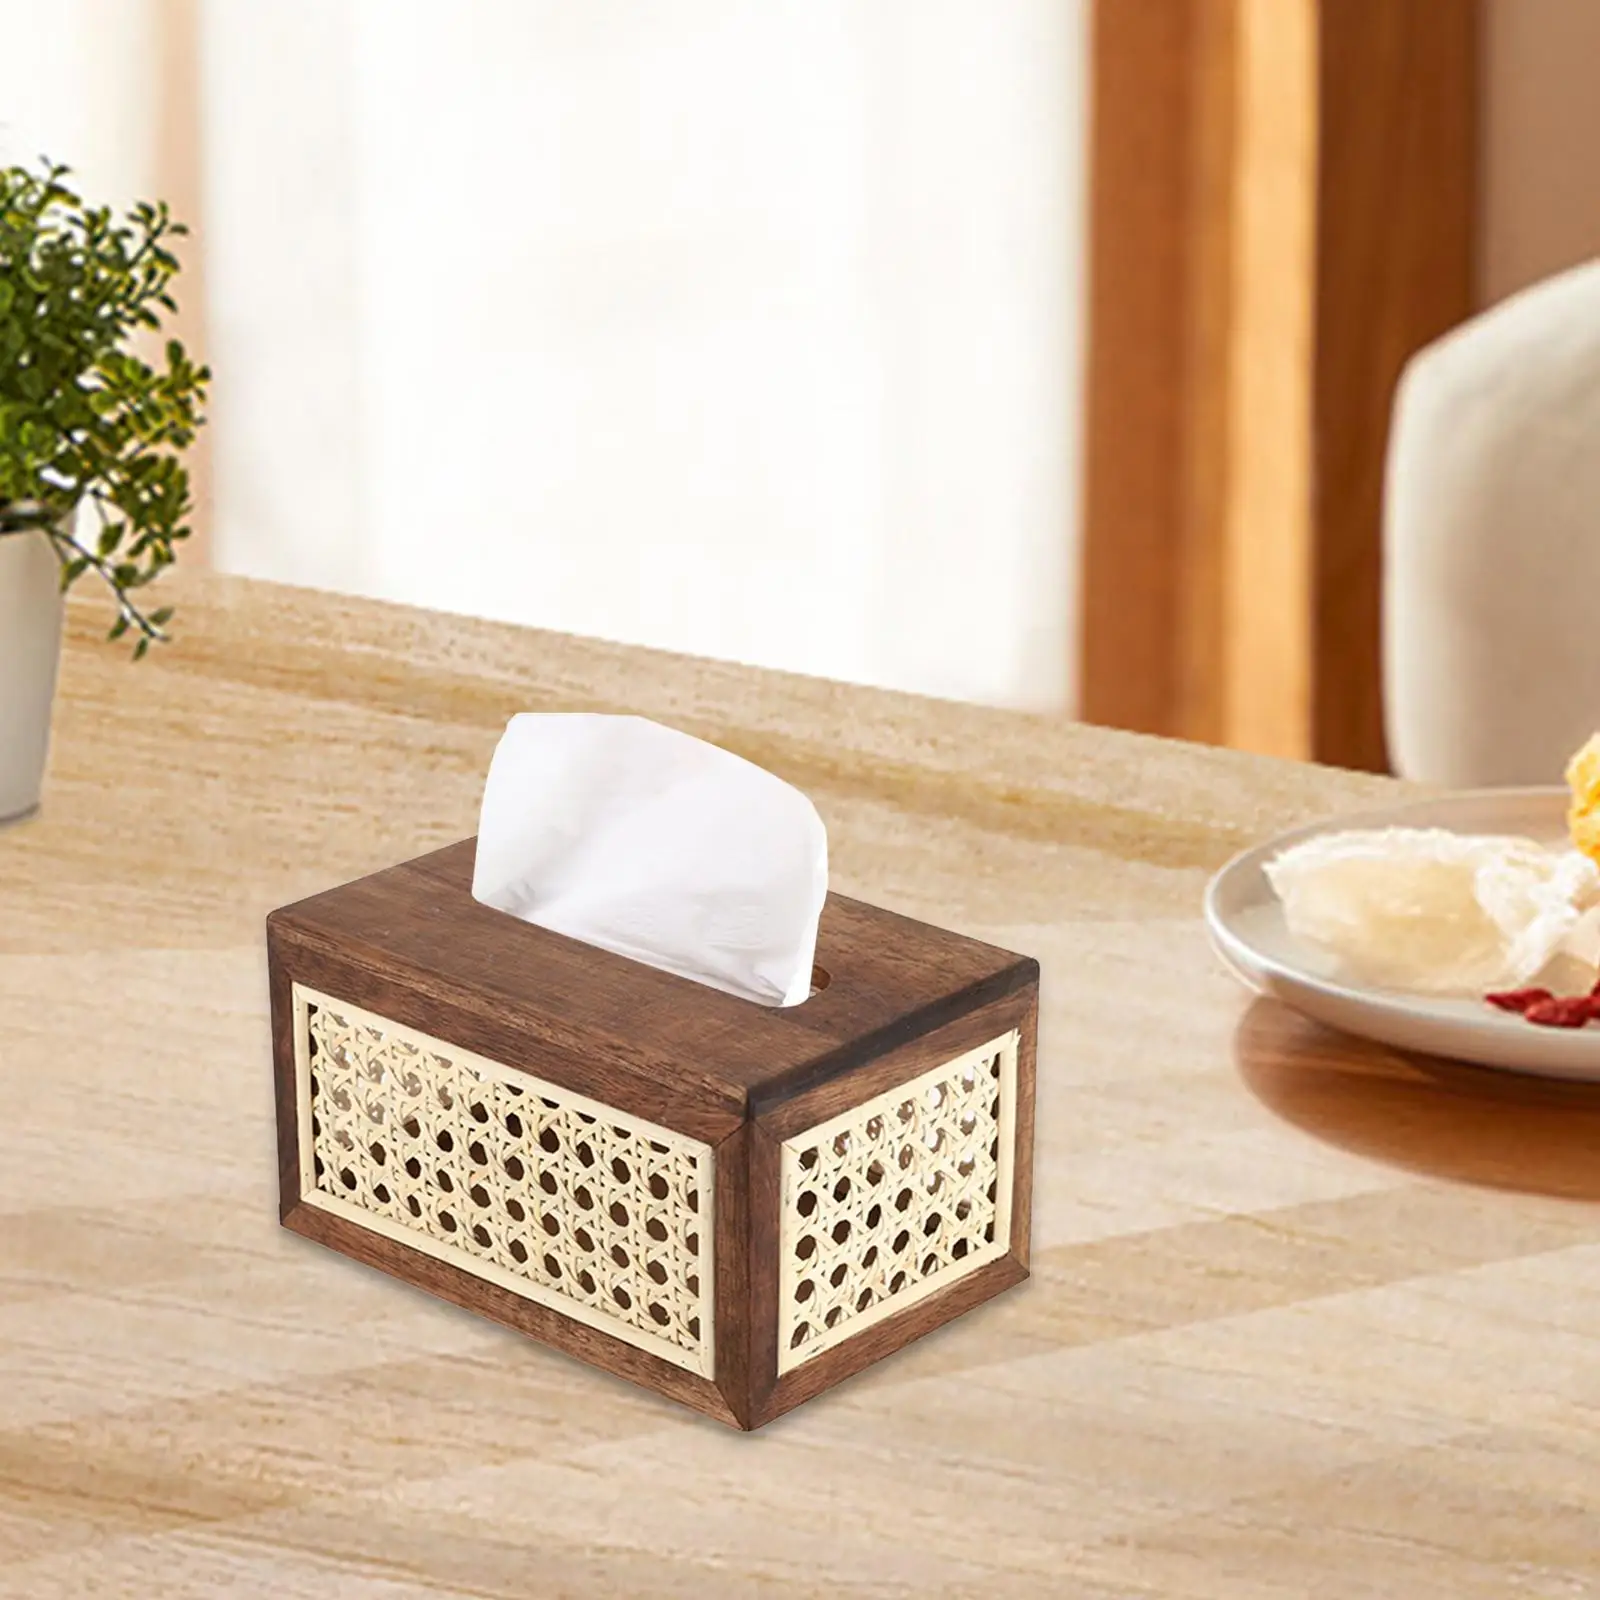 Wooden Tissue Box Tissue Case Durable Portable Modern Paper Organizer Home Decor for Office Picnic Tabletop Kitchen Home